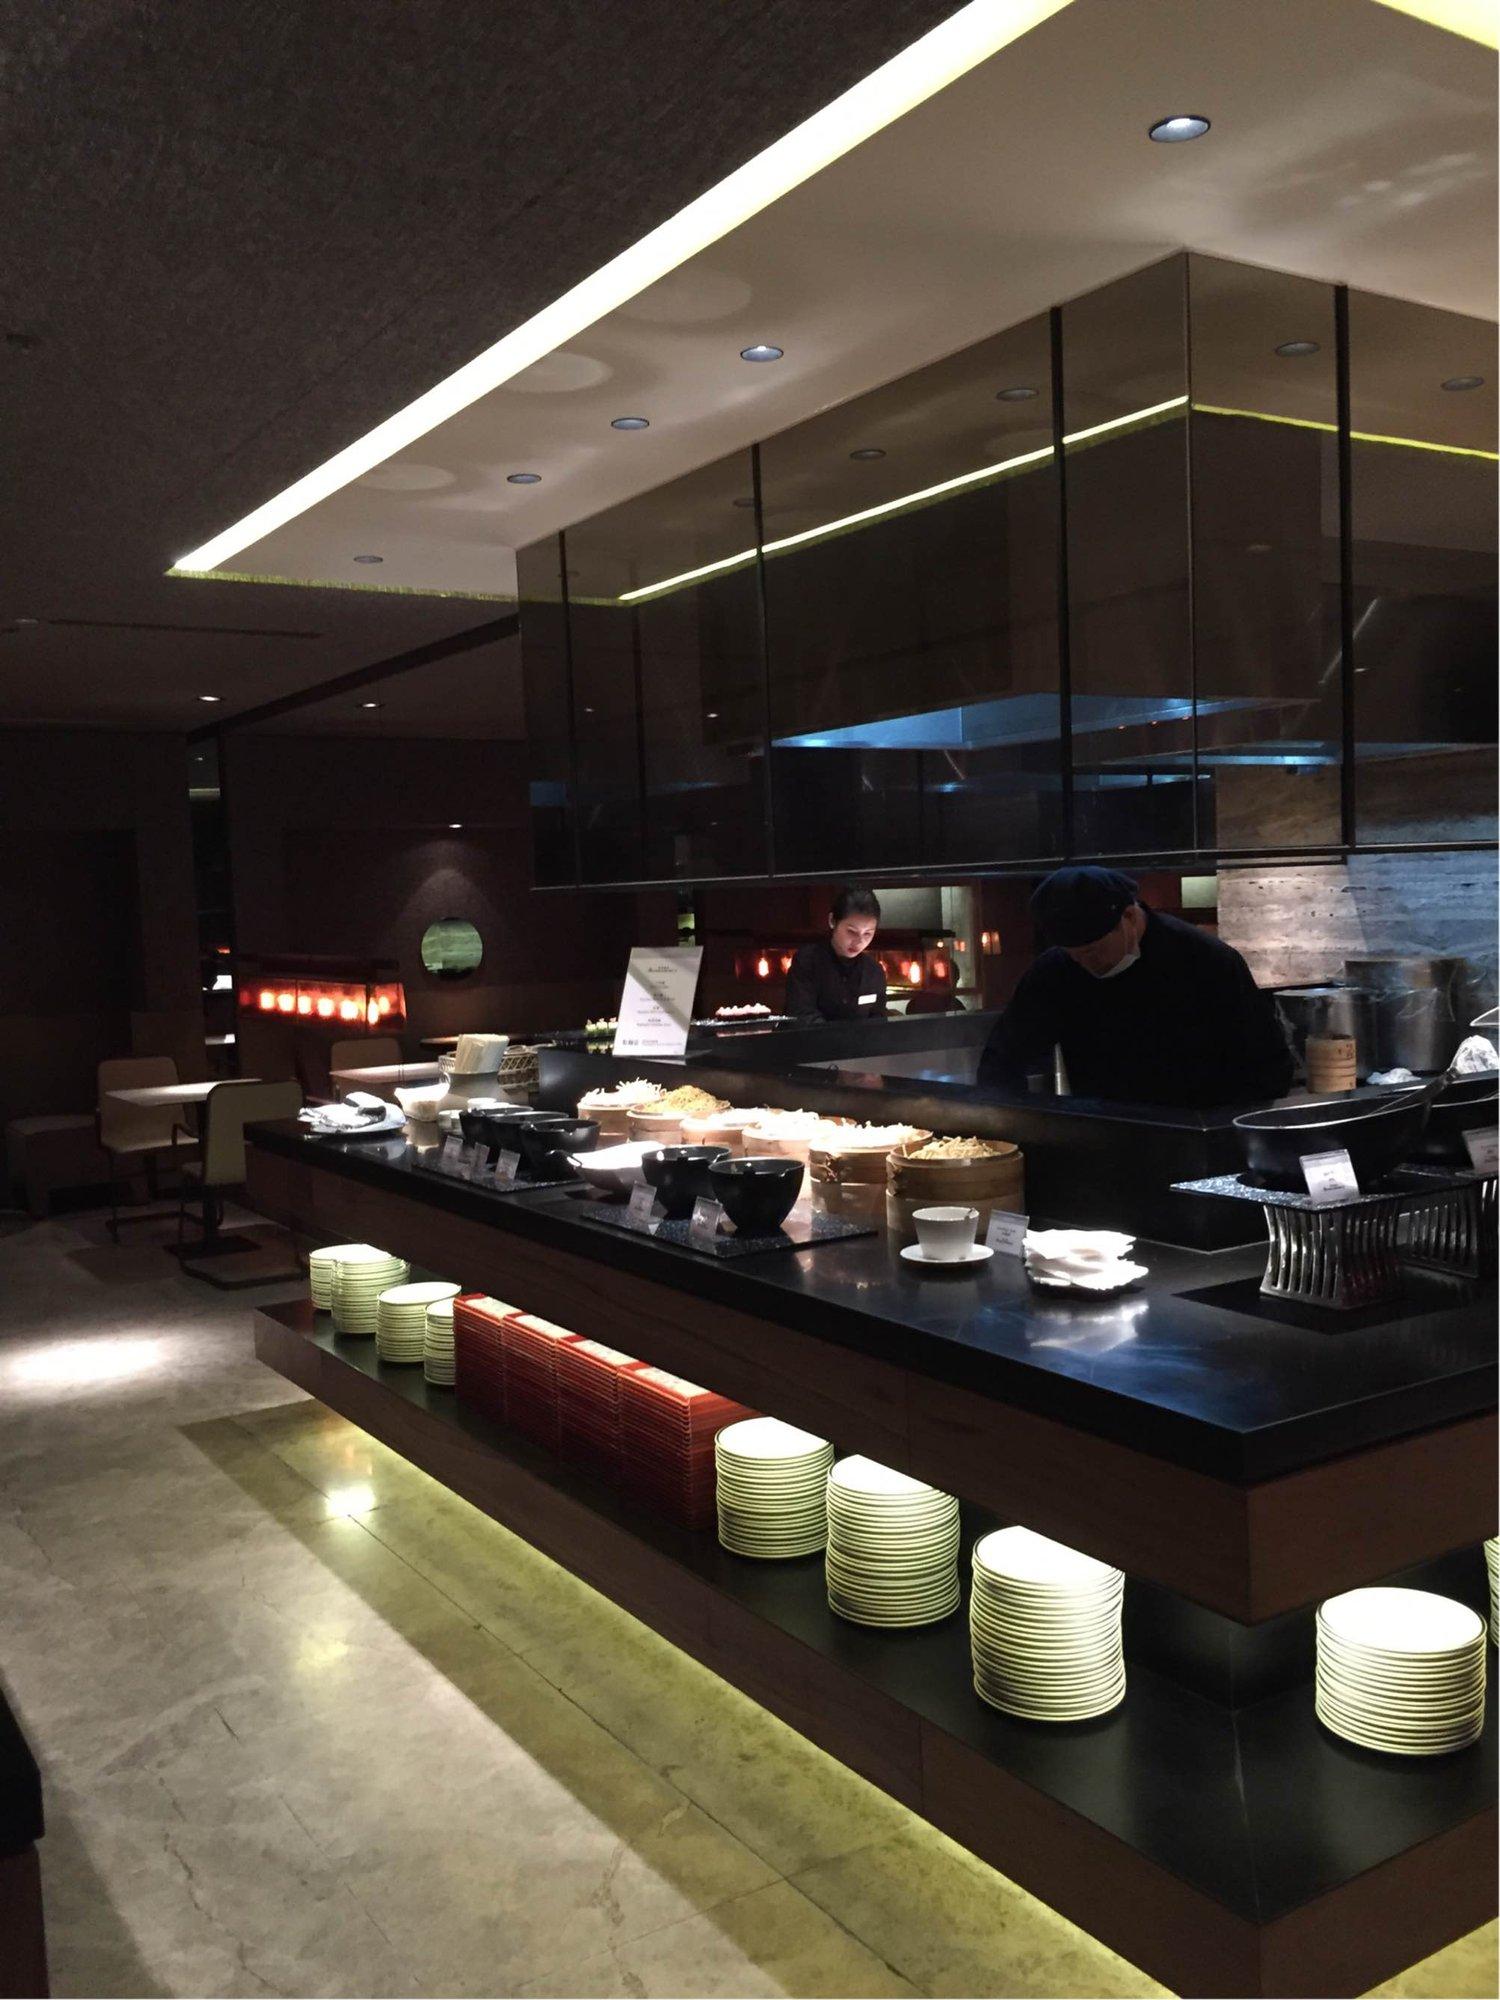 China Airlines Lounge (V1) image 7 of 44